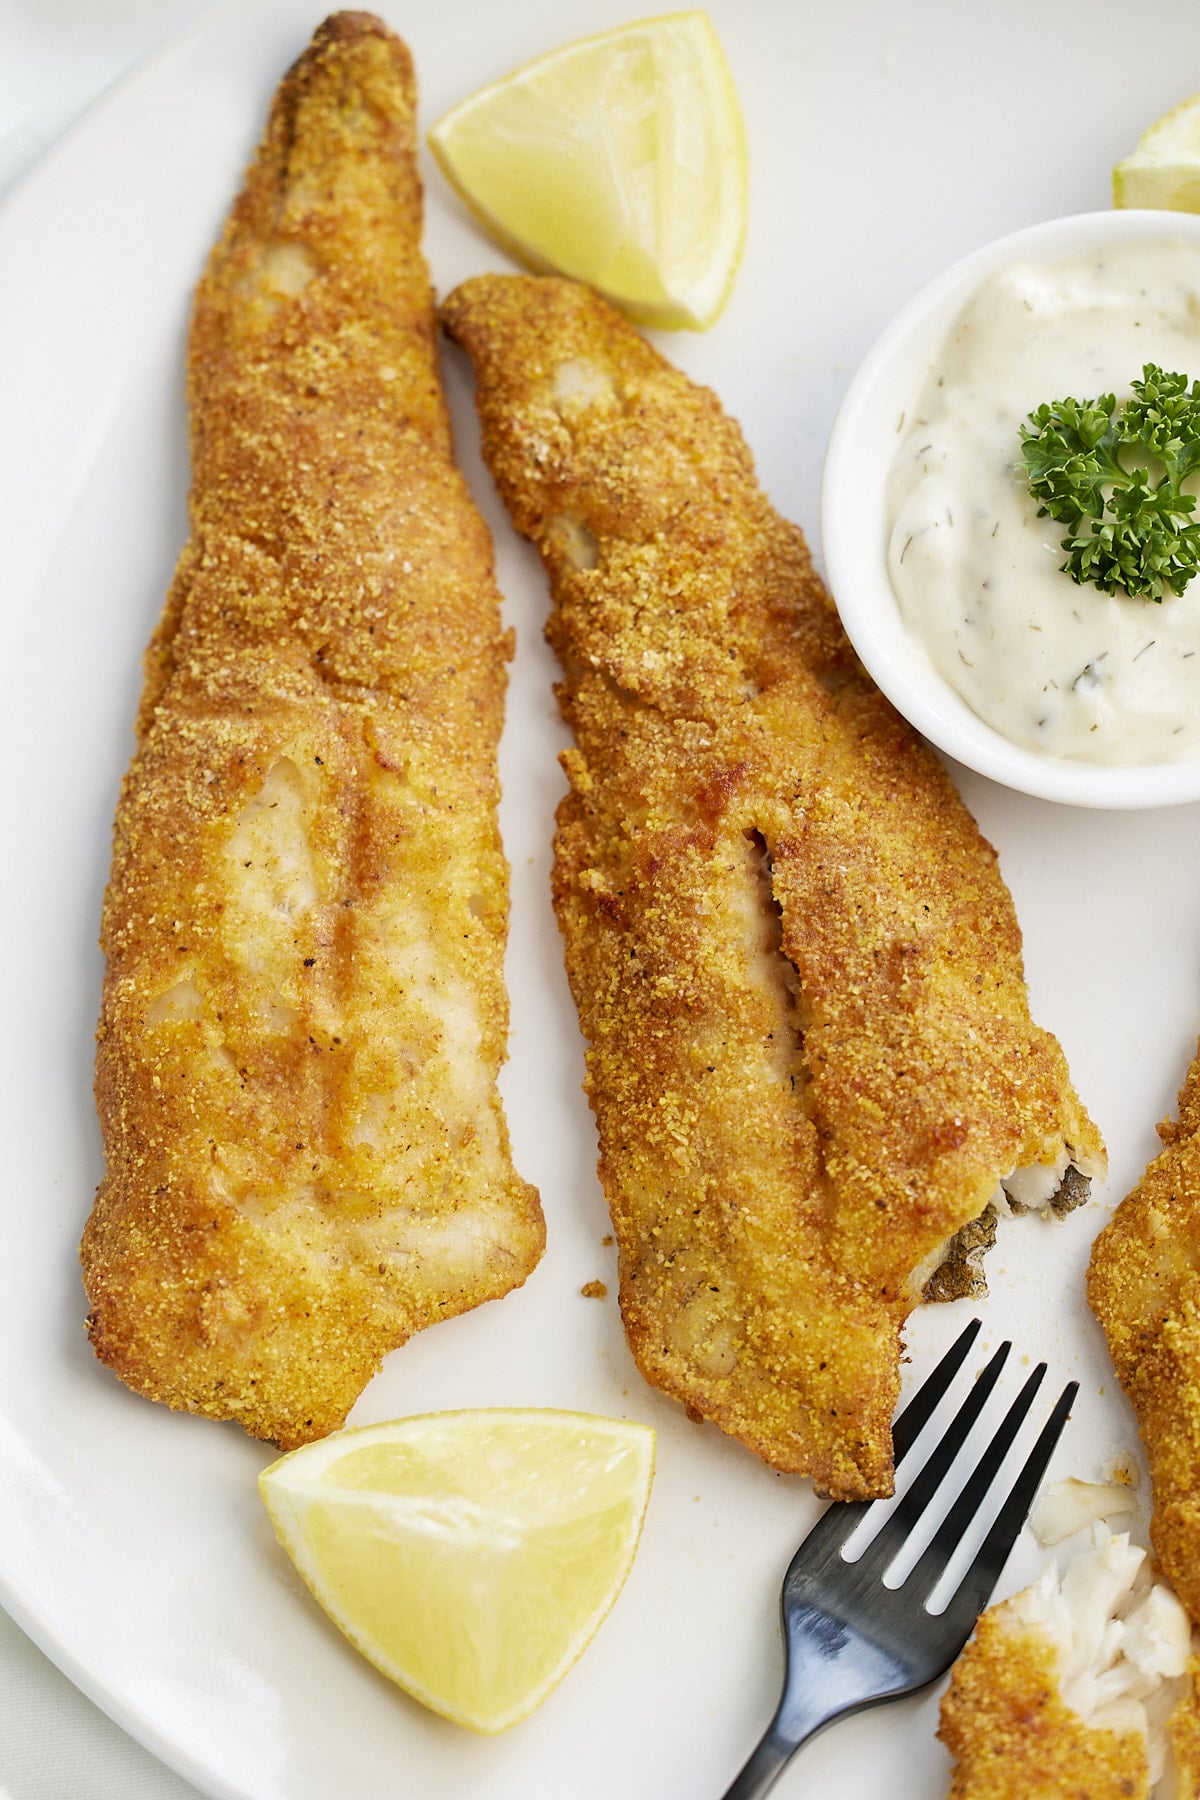 This Crispy Air Fryer Fish Recipe is delicious and healthy. Tried and true method for golden and crispy fish filets in the air fryer. #airfryer #airfryerrecipes #airfryerfish #healthy #healthyrecipes #myforkinglife #airfriedfish #crispyairfriedfish #easyrecipe #quickrecipe #dinnerecipes